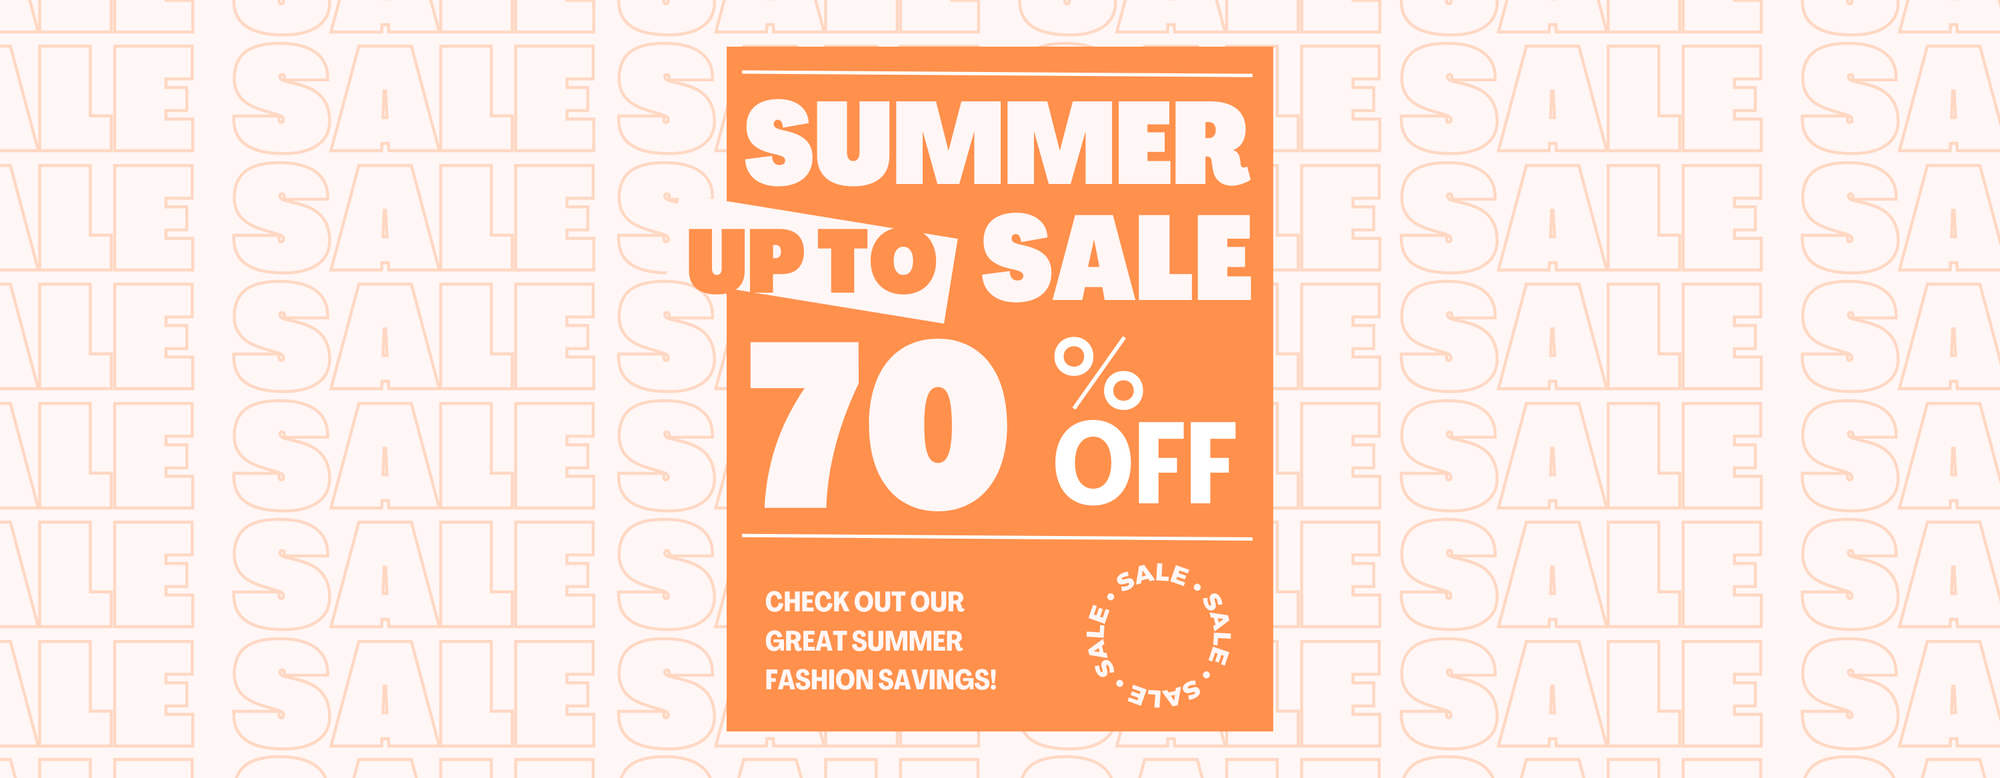 Summer Sale now up to 70% off. Check out our great summer savings!